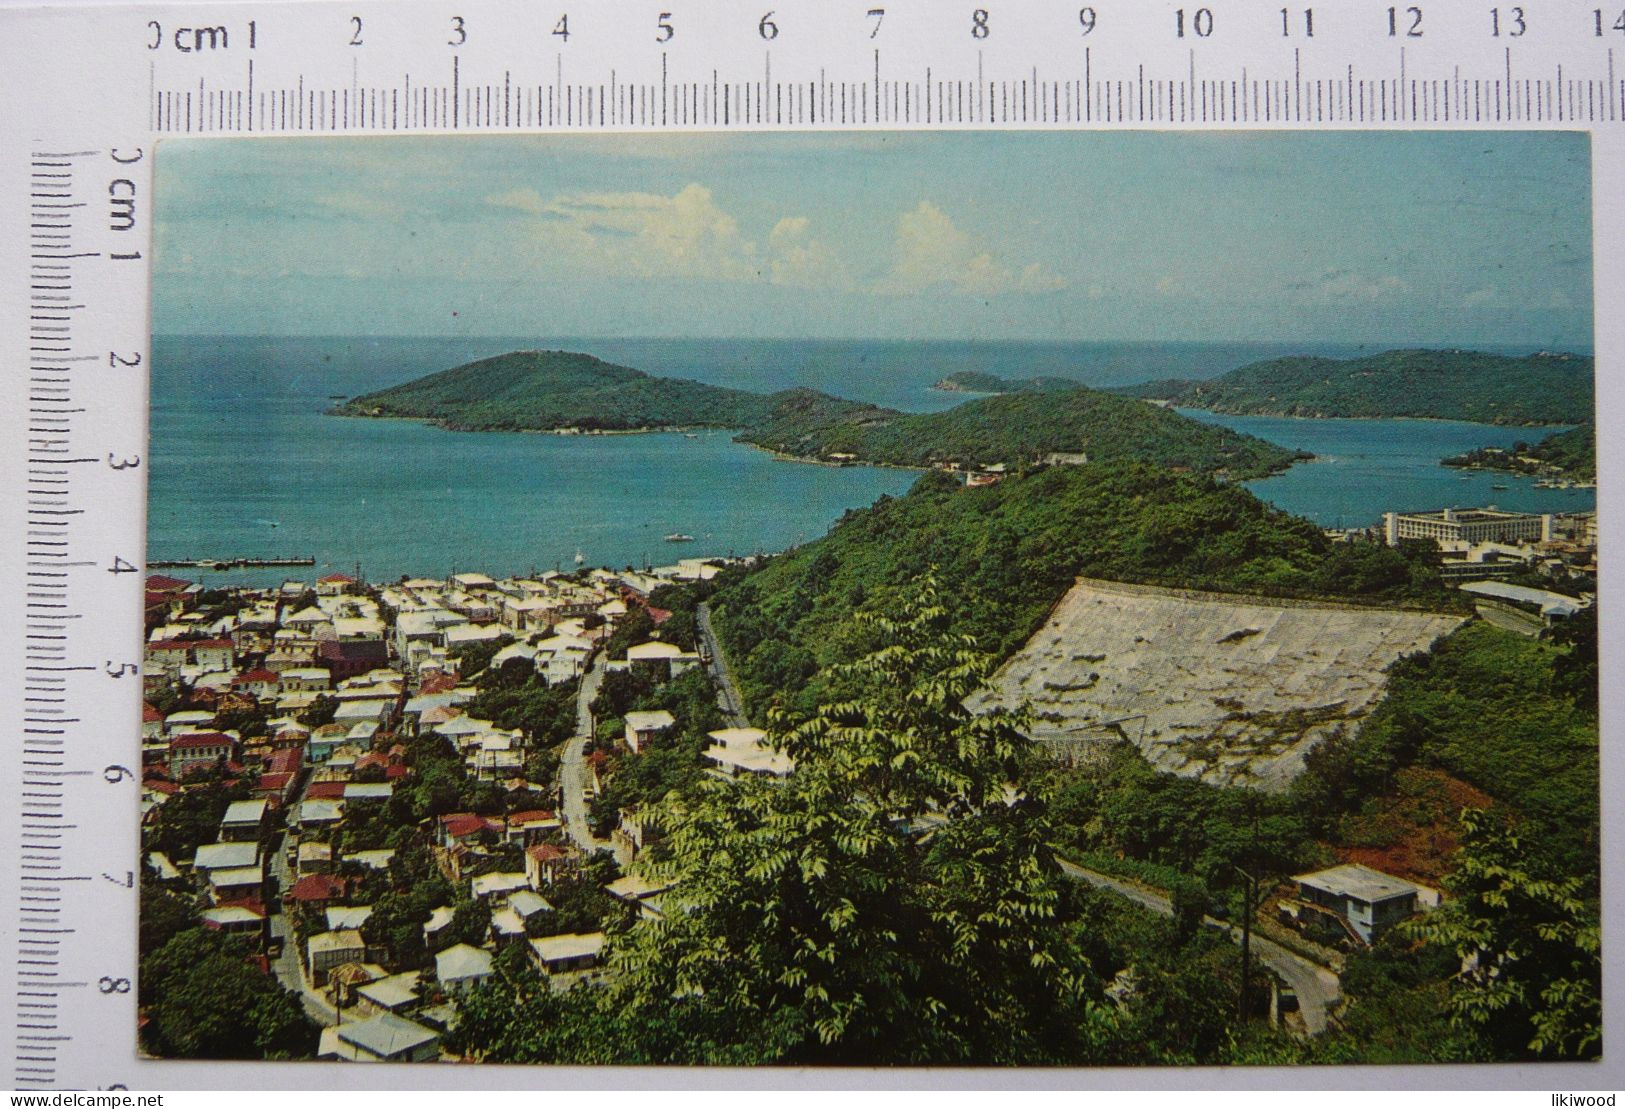 Charlotte Amalie Harbor, With Hassel And Water Islands Offshore, St.Thomas - Virgin Islands - Jungferninseln, Amerik.